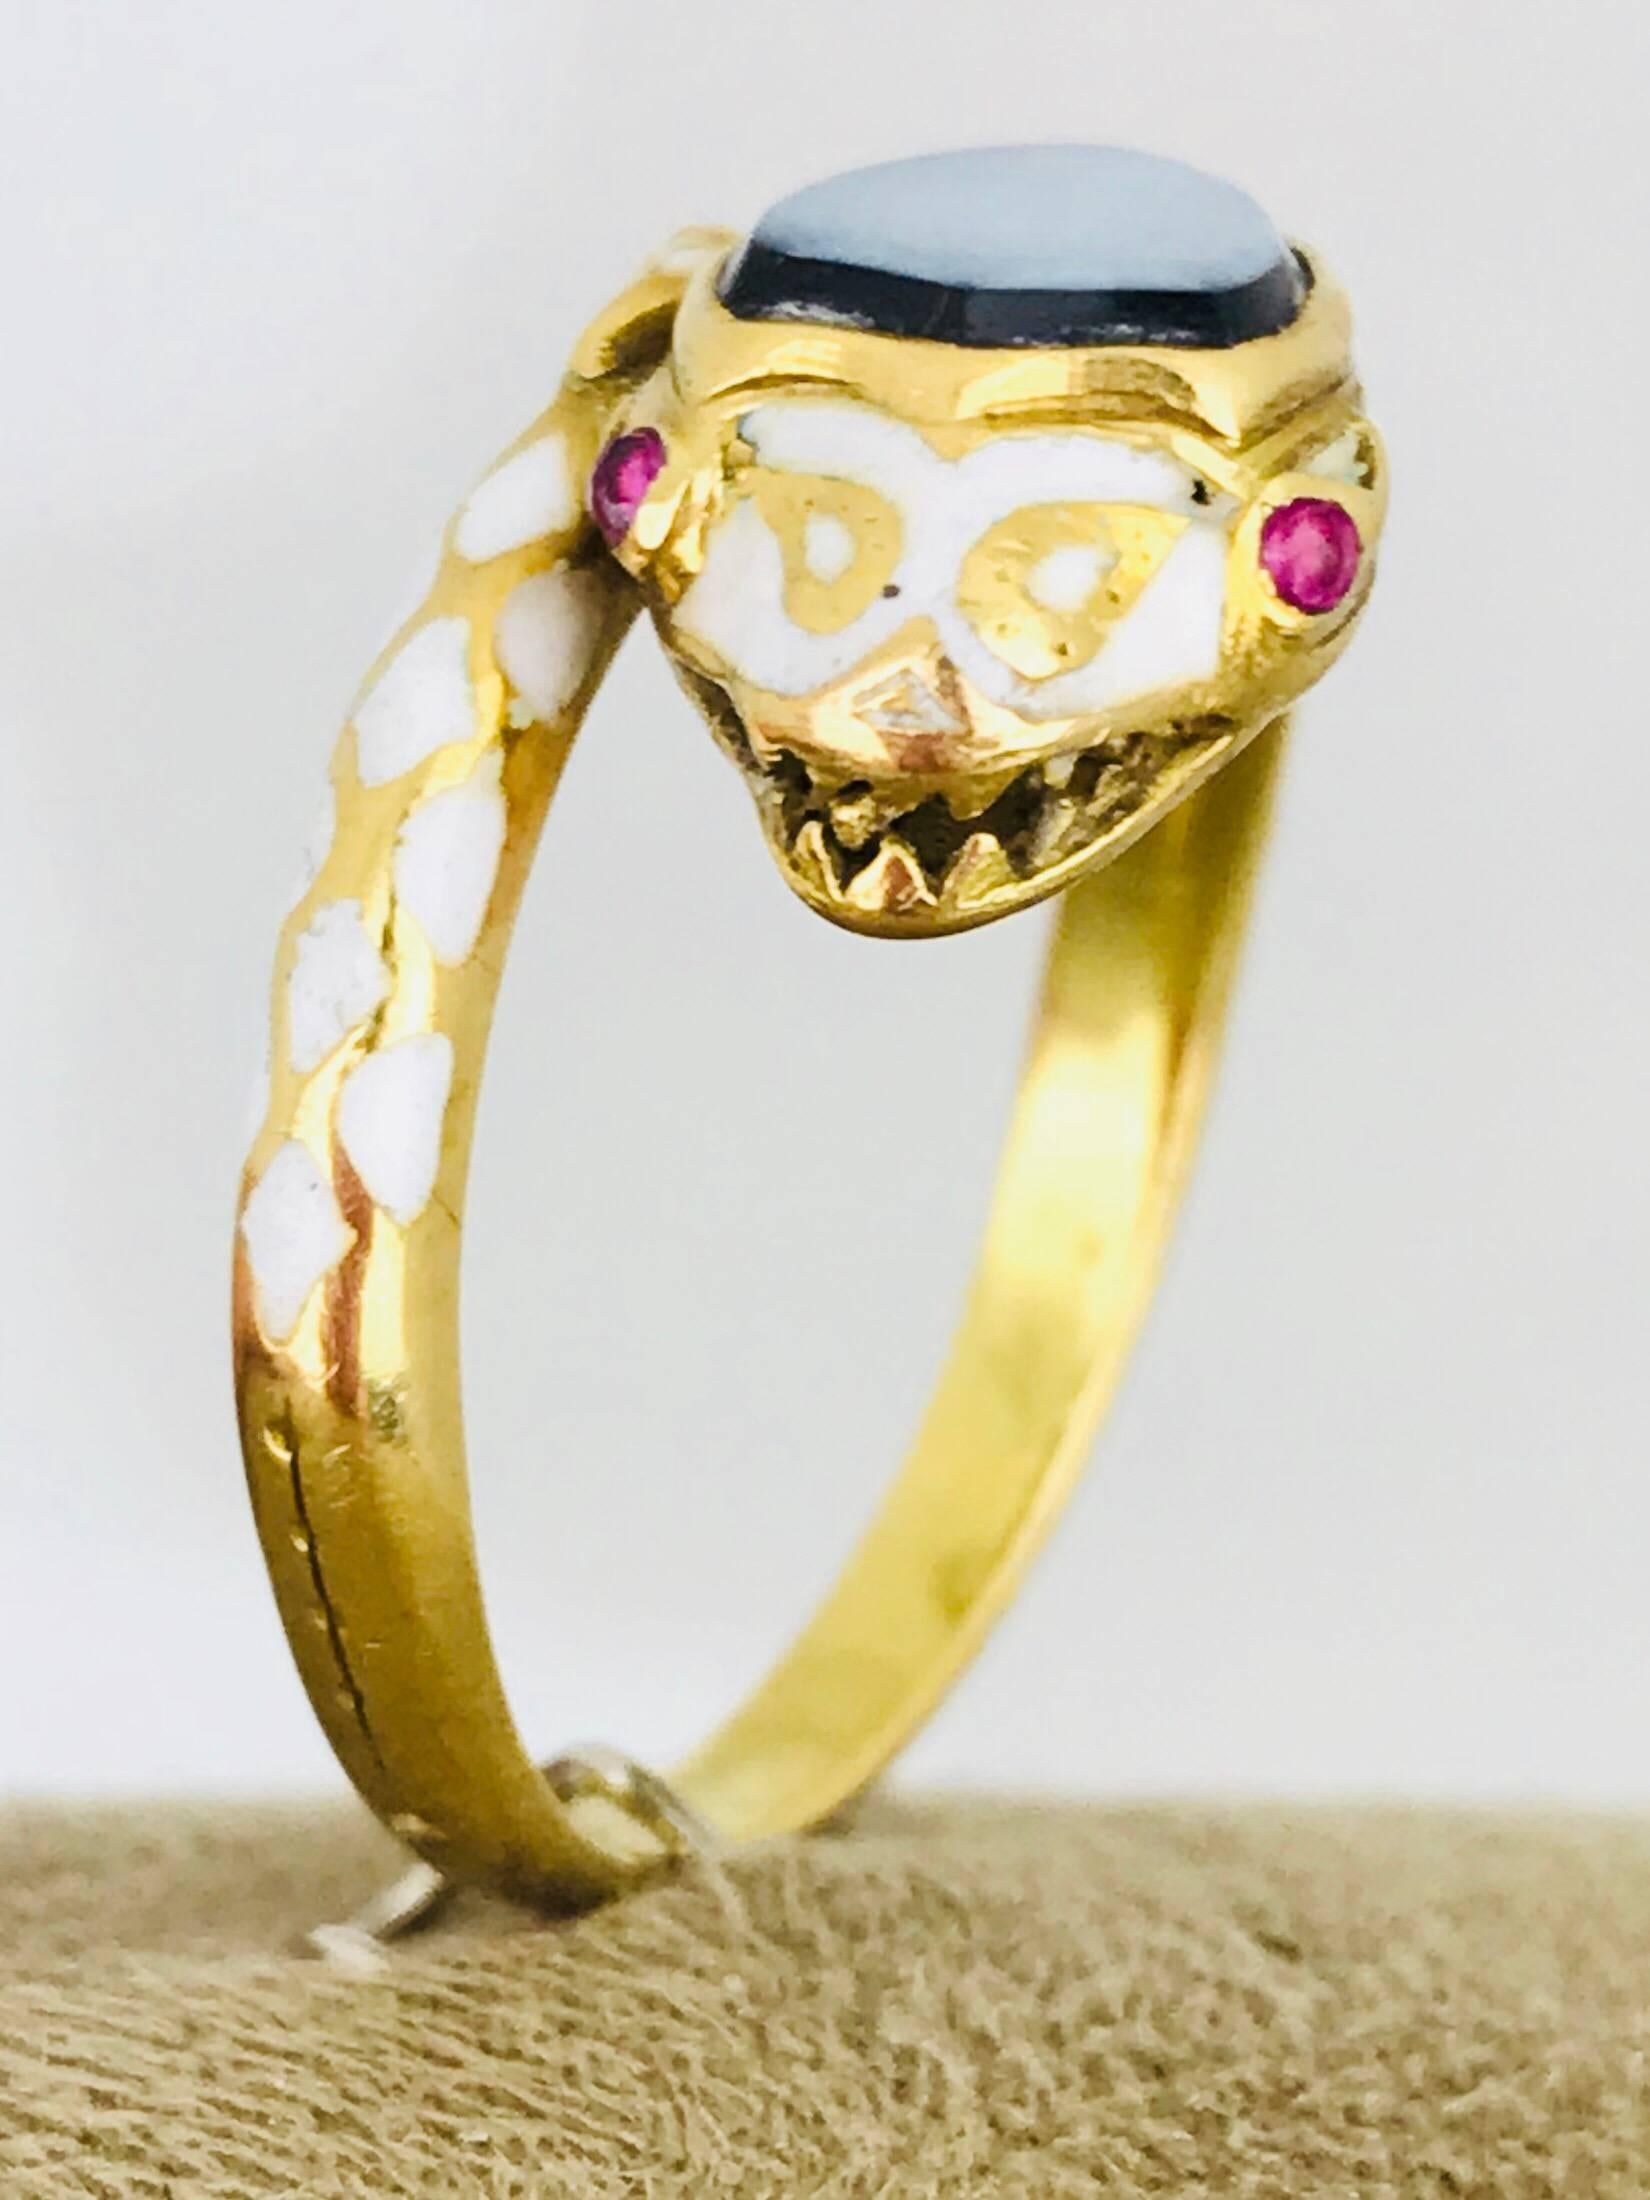 Enamel, 18 karat snake ring with distinguished white enamel contrasting colors upon this beautiful ring. The top head of the snake is a Carnelian Black Onyx which is a white color above black onyx.  The eyes are red rubies measuring 1.35 millimeters